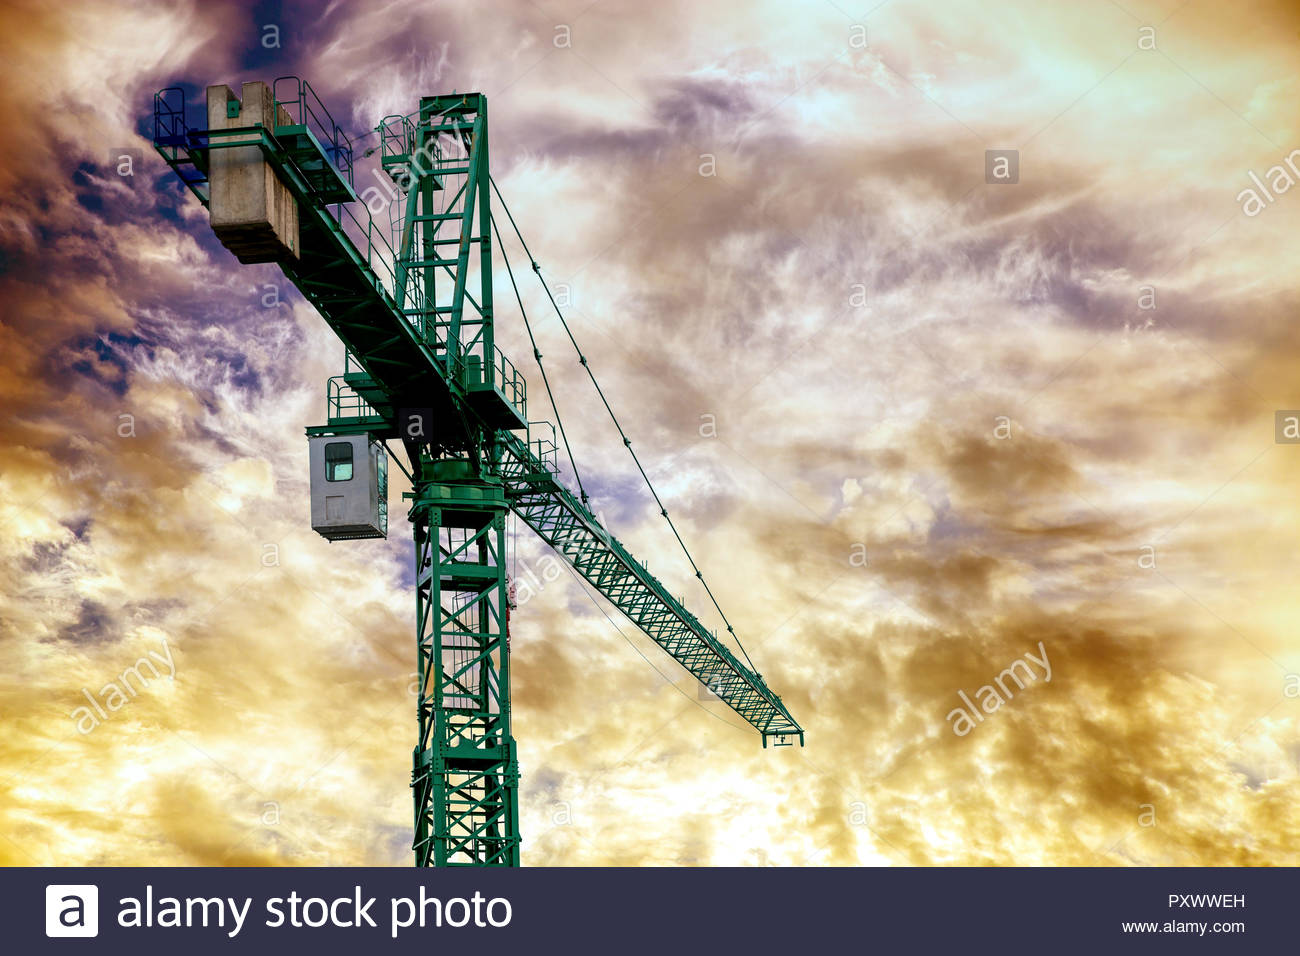 Green Construction Crane At Sunset Background Image With Copy